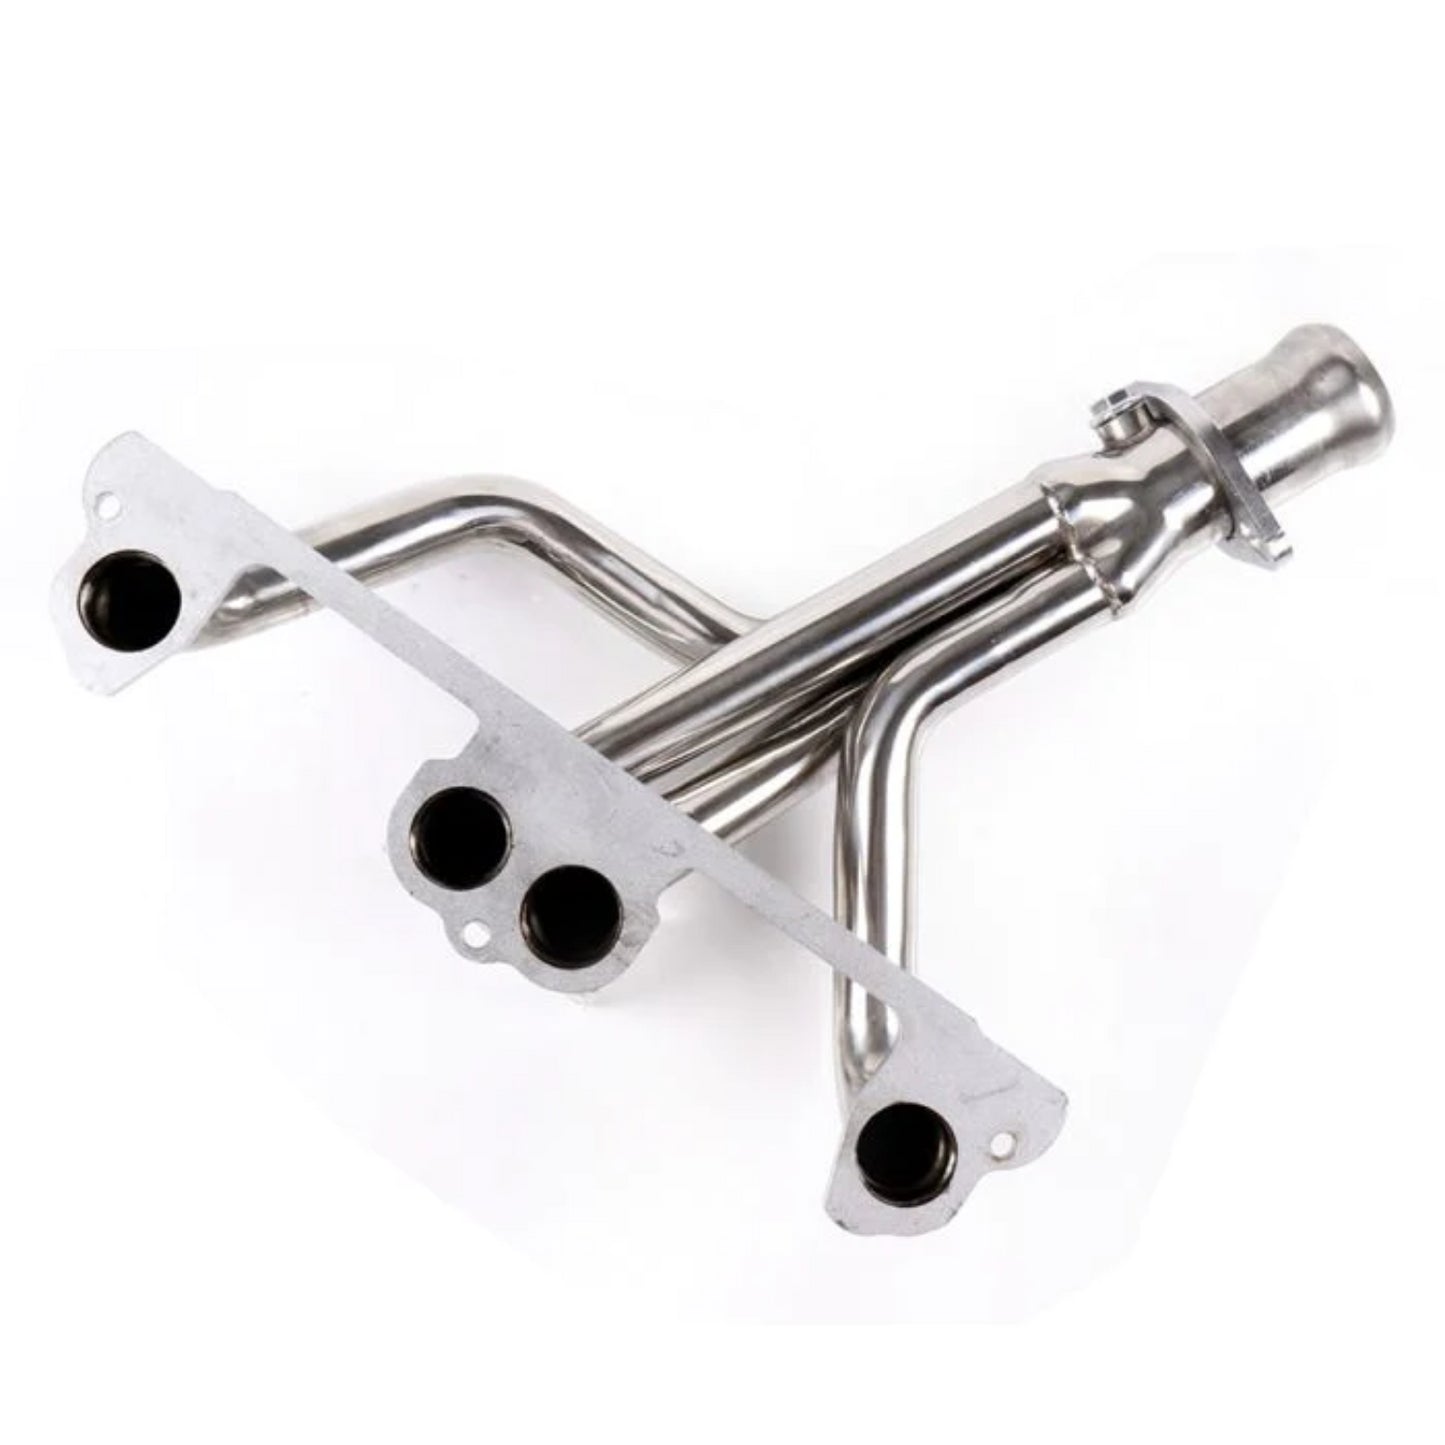 Exhaust Manifold Header for 1991,1993-1995 Jeep Wrangler 2.5L